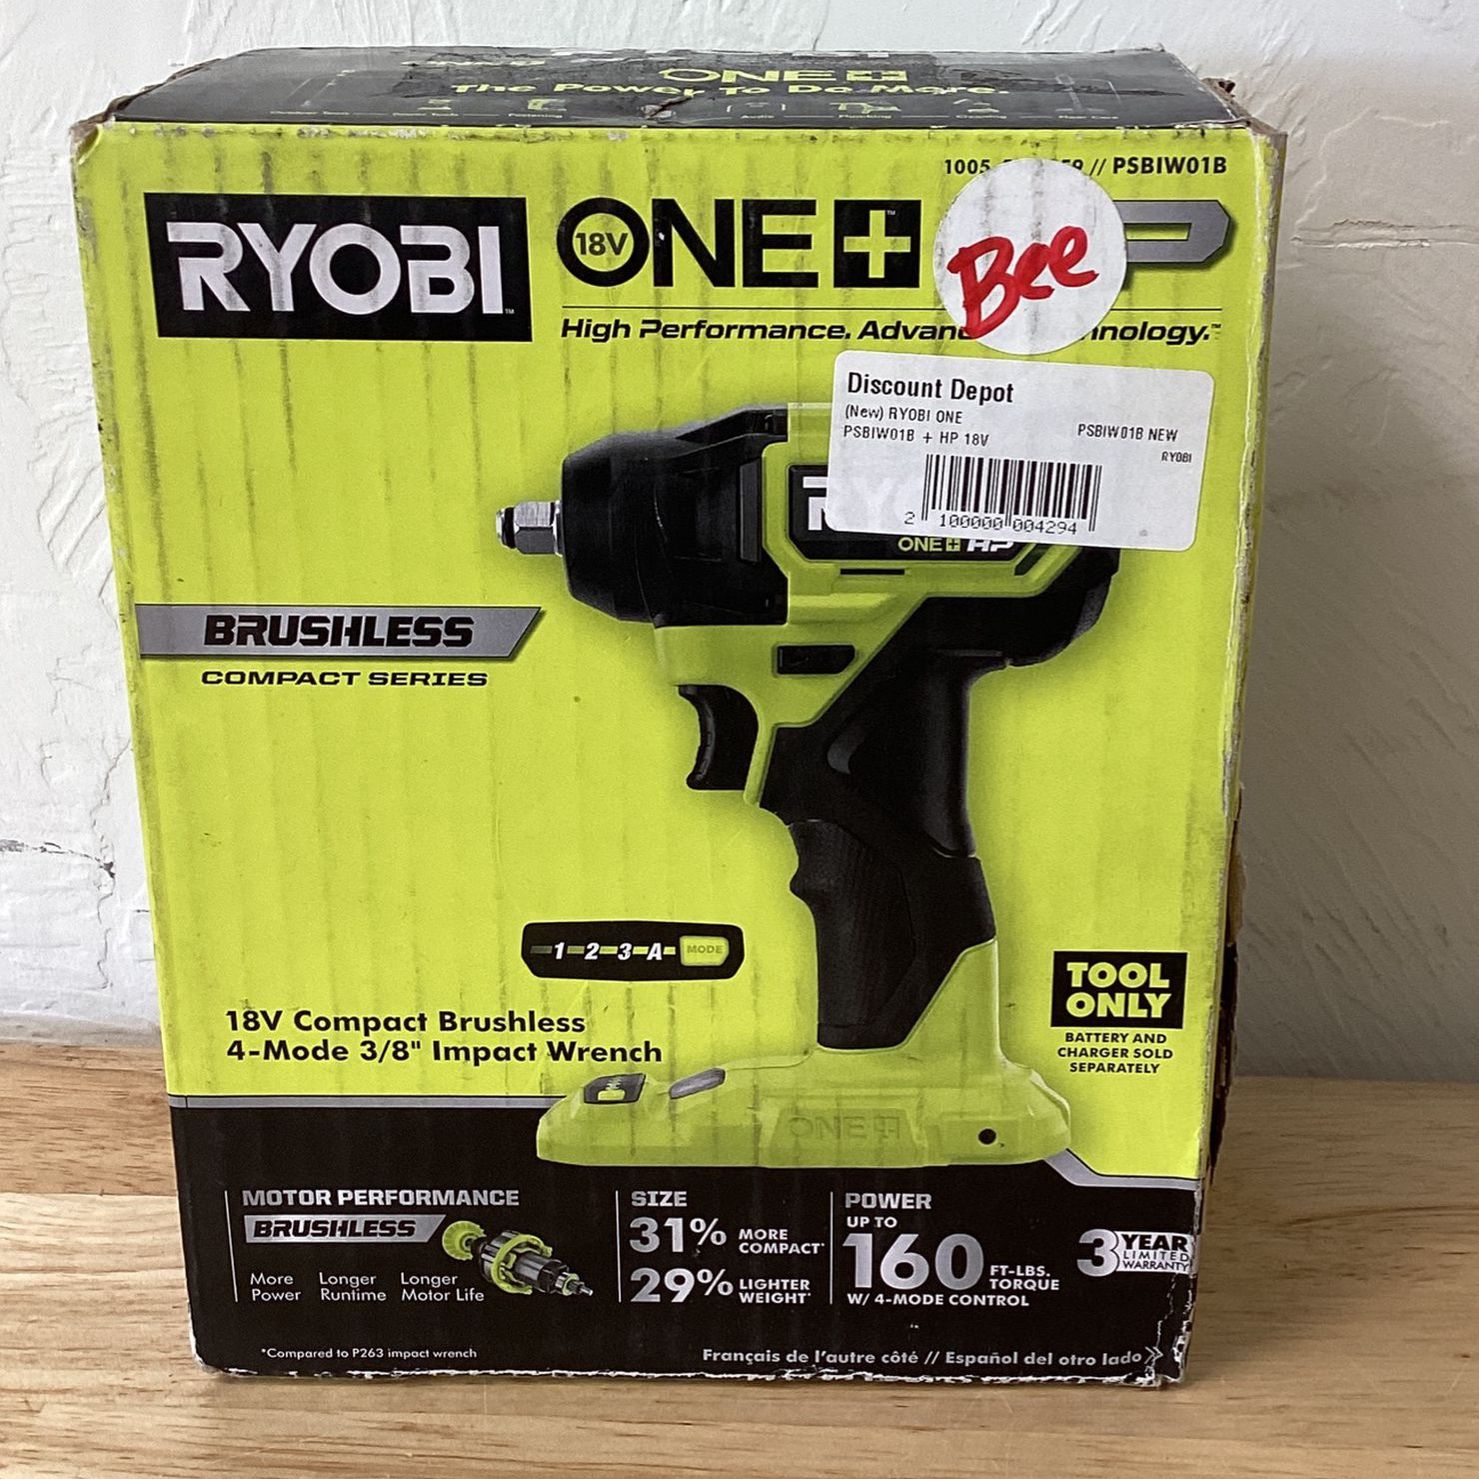 (New) RYOBI ONE PSBIW01B + HP 18V Brushless Cordless Compact 3/8 in. Impact Wrench (Tool Only)